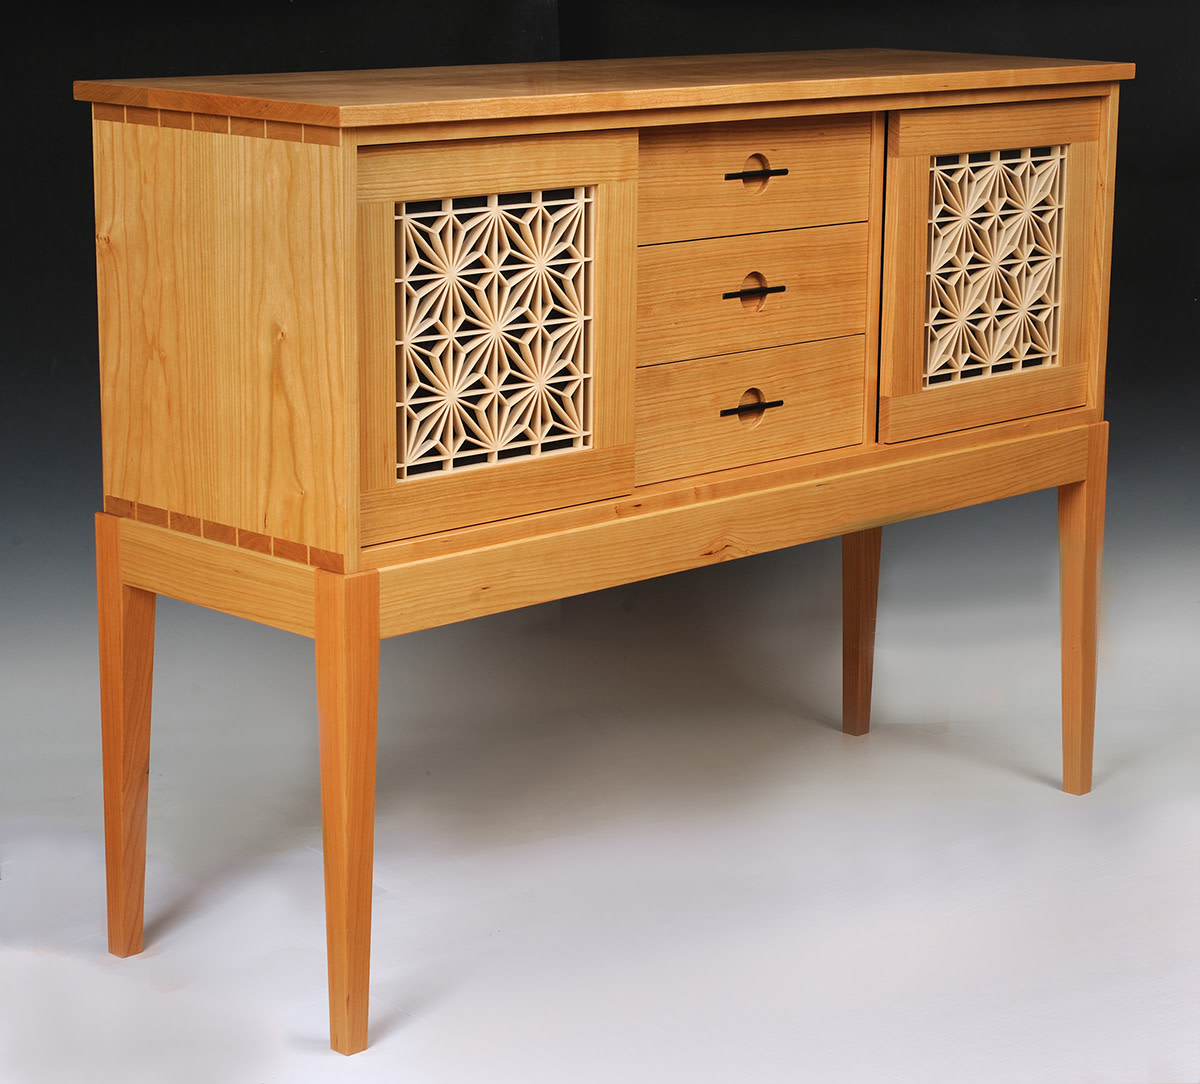 Michael Jury, principal designer and craftsman at M. Jury Woodworks, won Best in Show (Furniture Design) for this sideboard. 